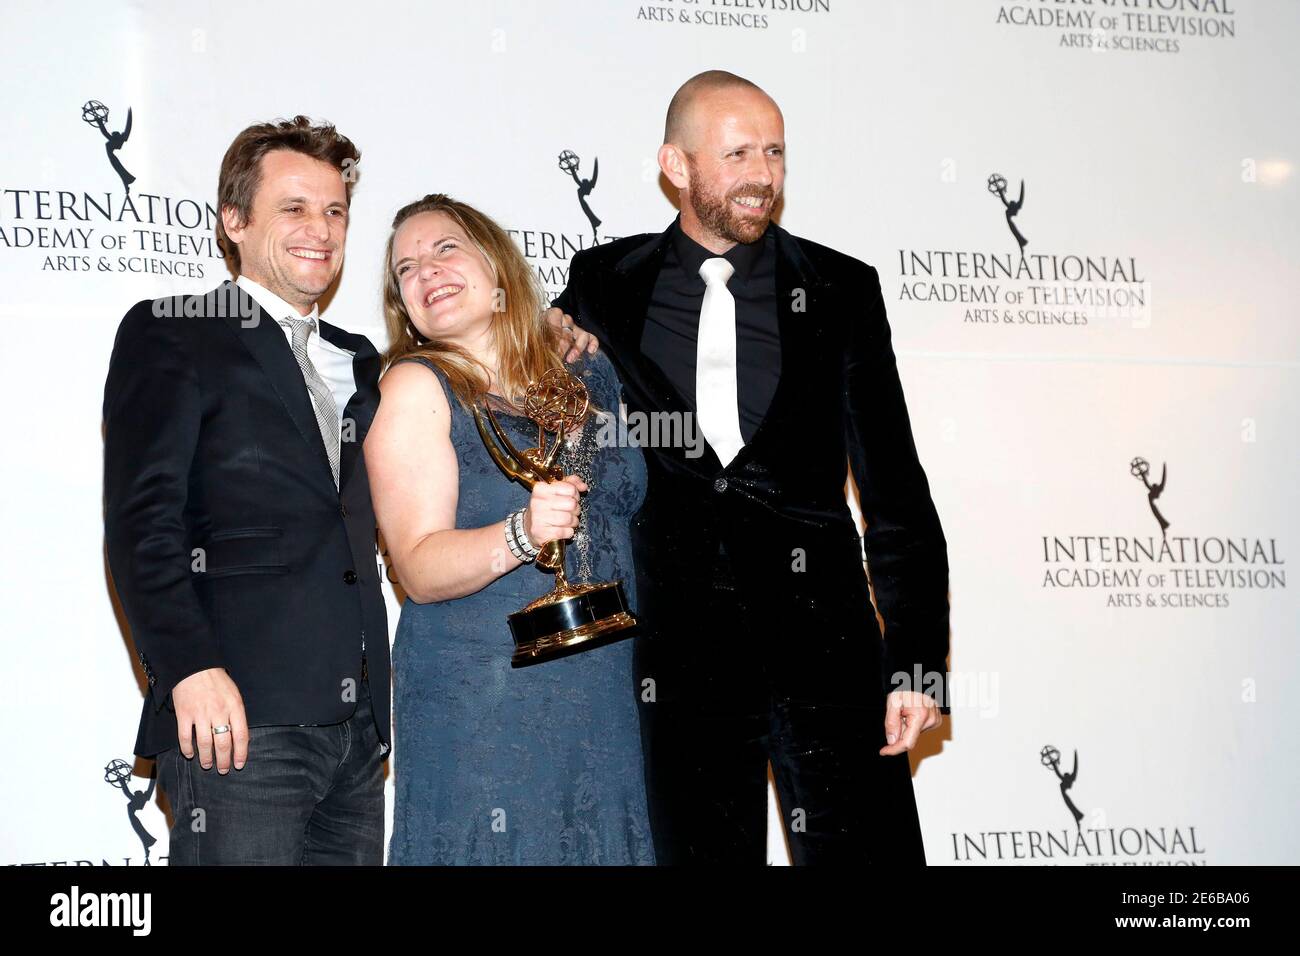 L-R) Comedy Award recipients Tim Van Aelst, Ruth Beeckmans and Gunther  Lesage from the series "What if? 2" celebrate backstage at the 42nd  International Emmy Awards in New York November 24, 2014.